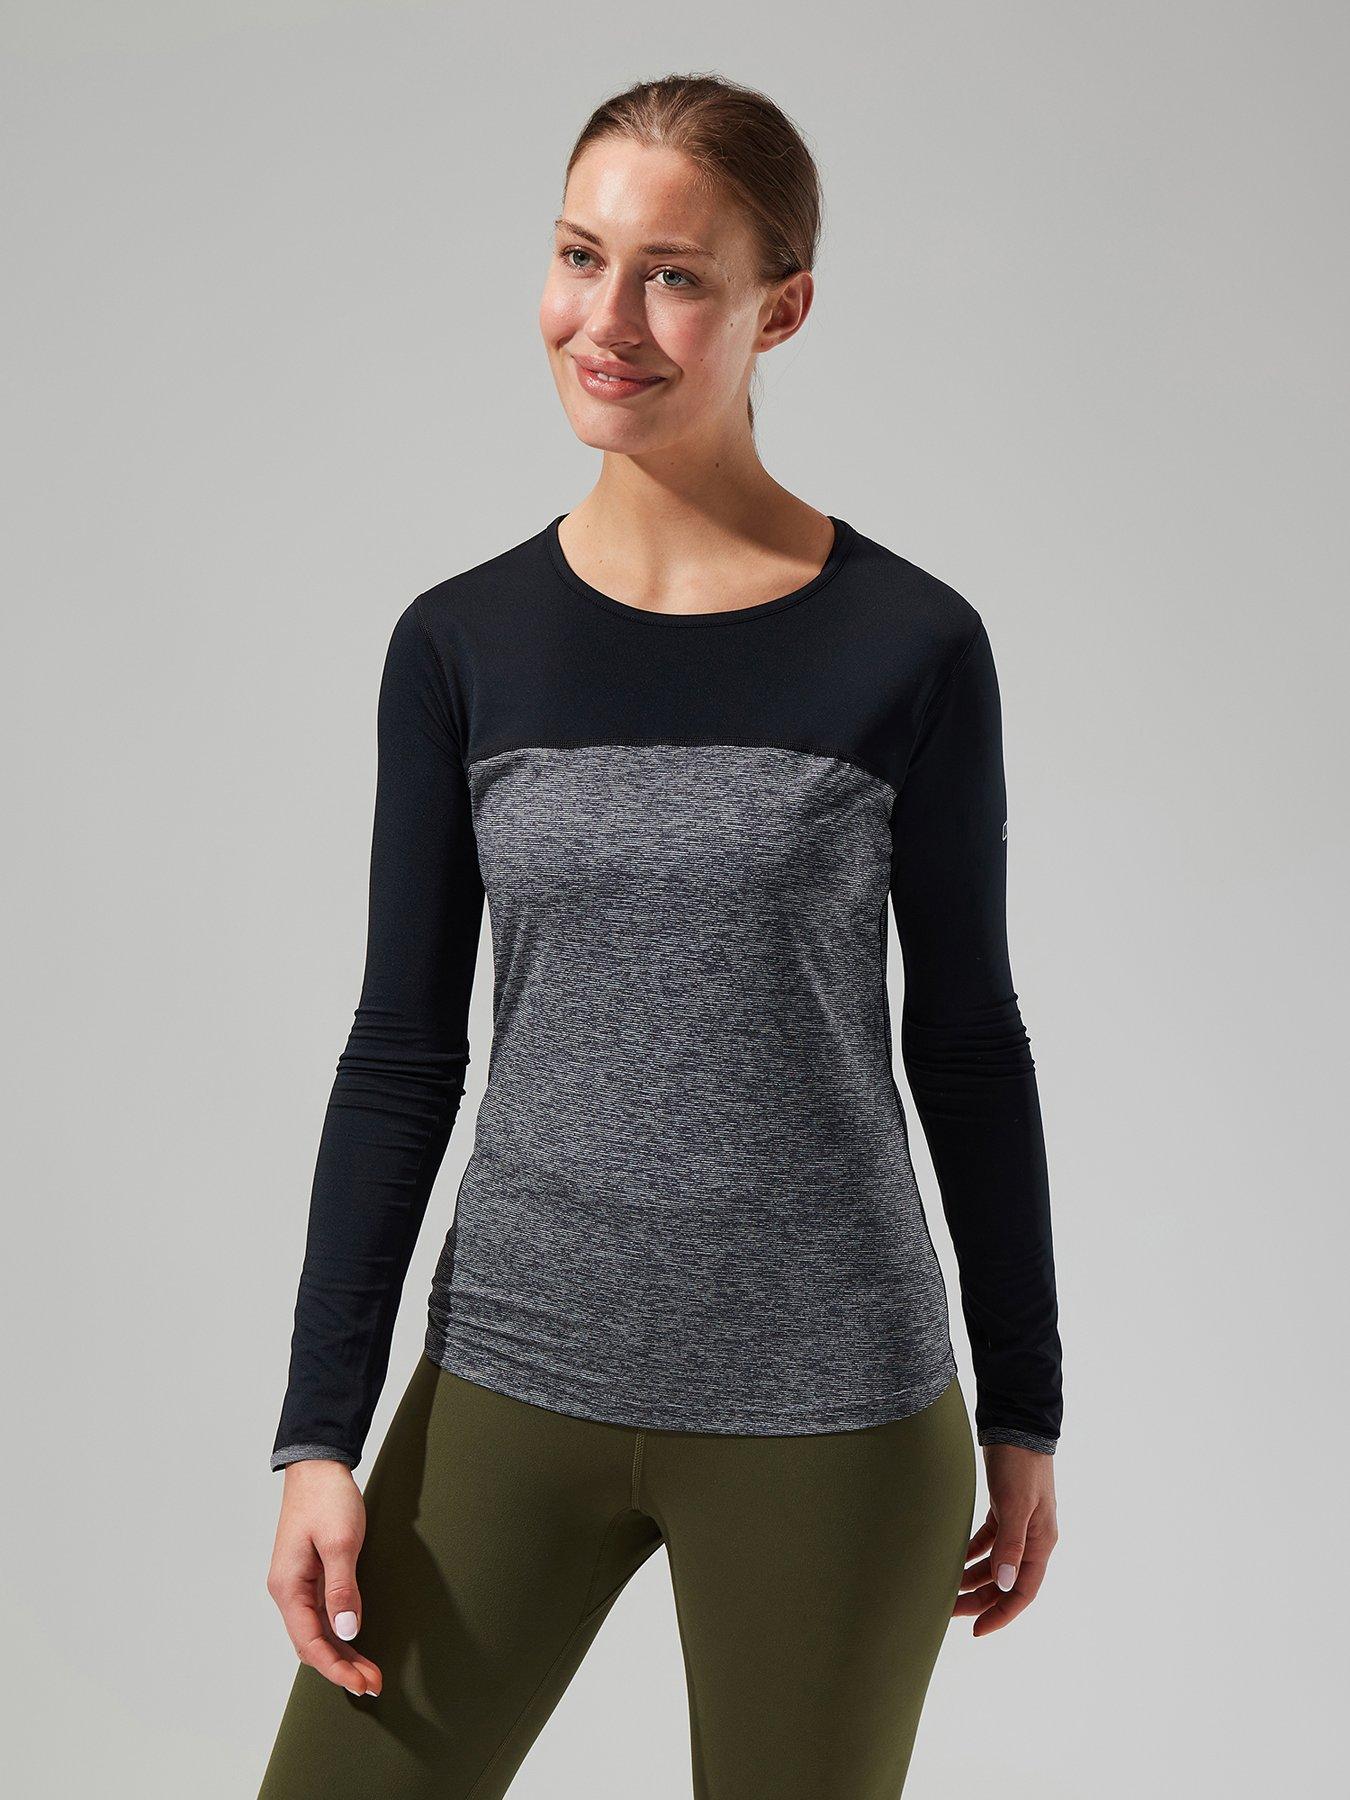 Lululemon Swiftly Tech Long Sleeve Crew Black White Ombre Athletic Top 6